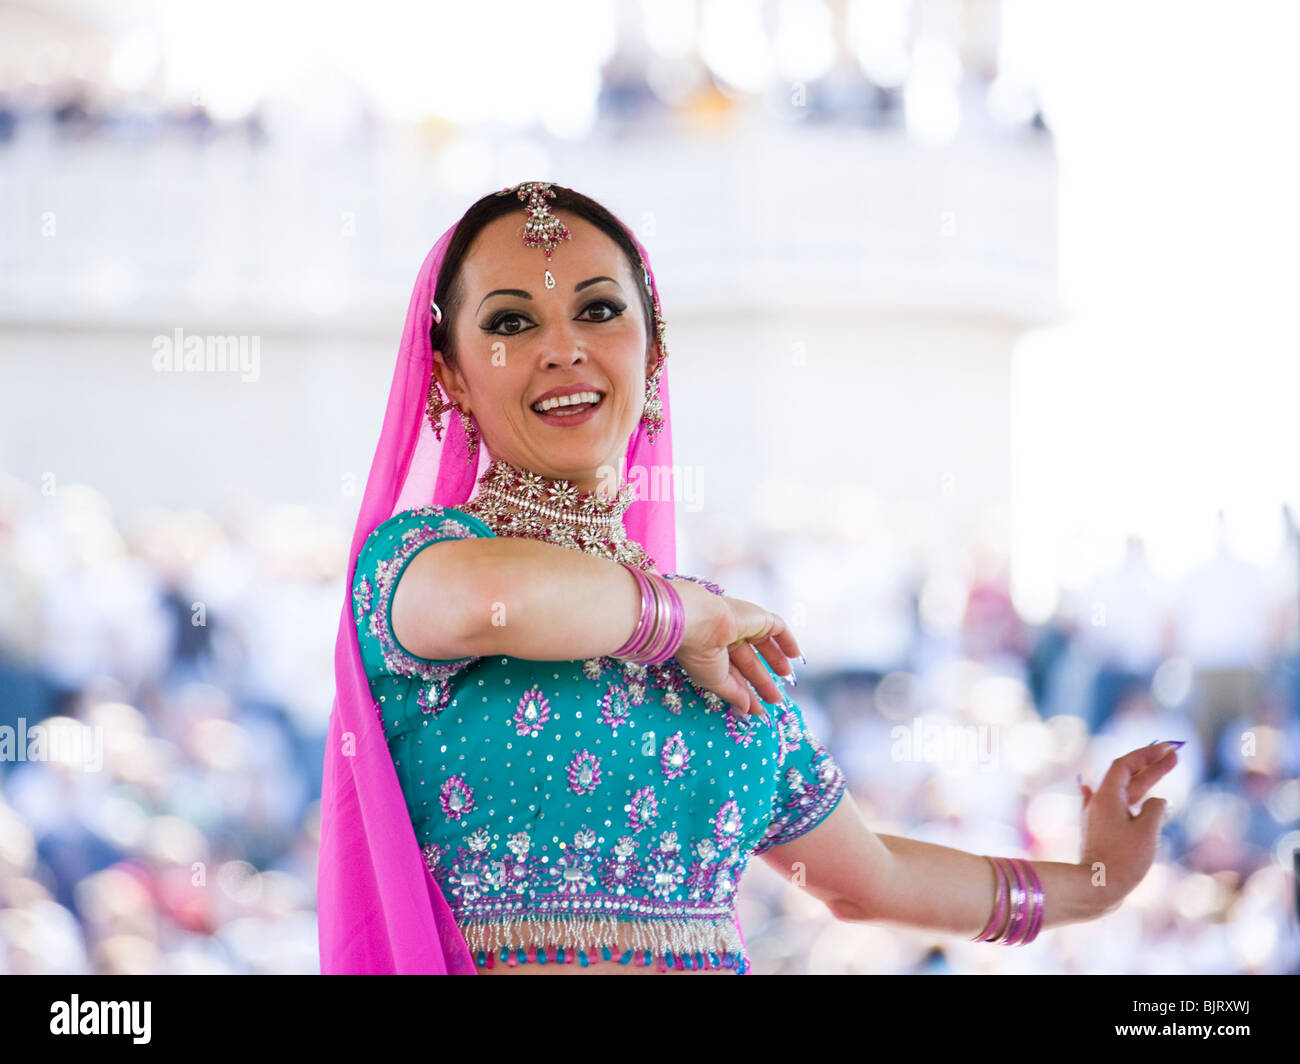 USA, Utah, Spanish Fork, portrait of mid adult dancer in traditional clothing performing on stage Stock Photo